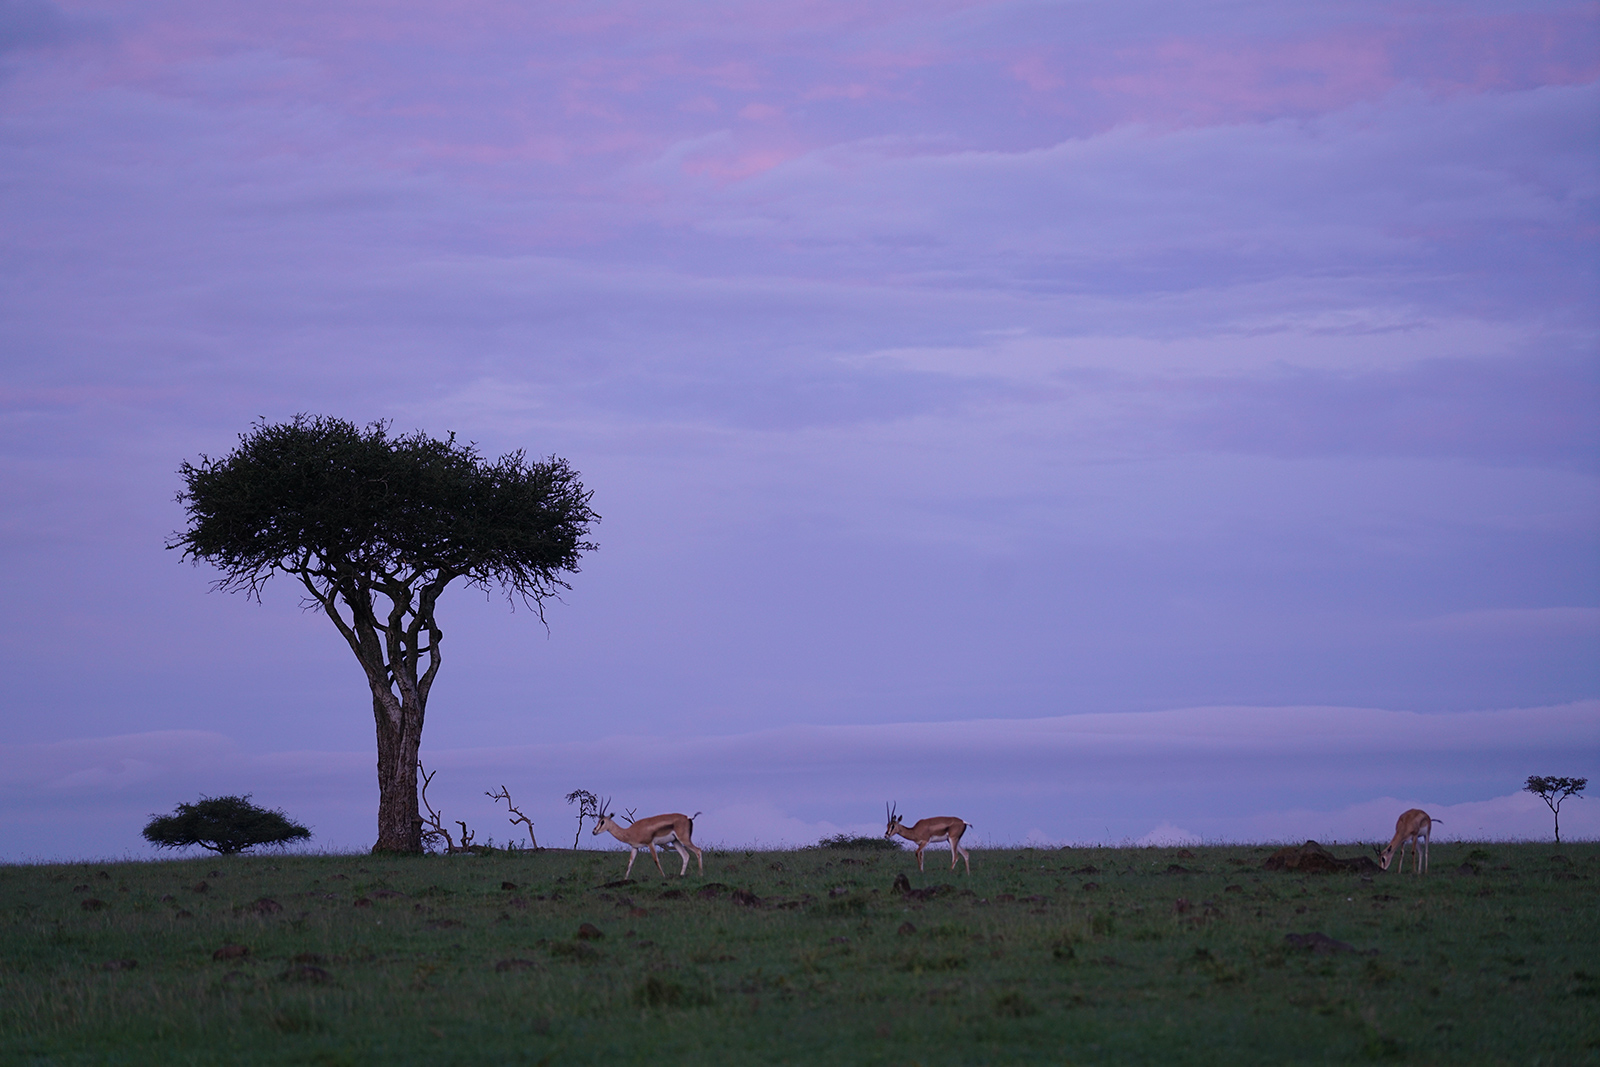 The landscape in Mara is absolutely stunning